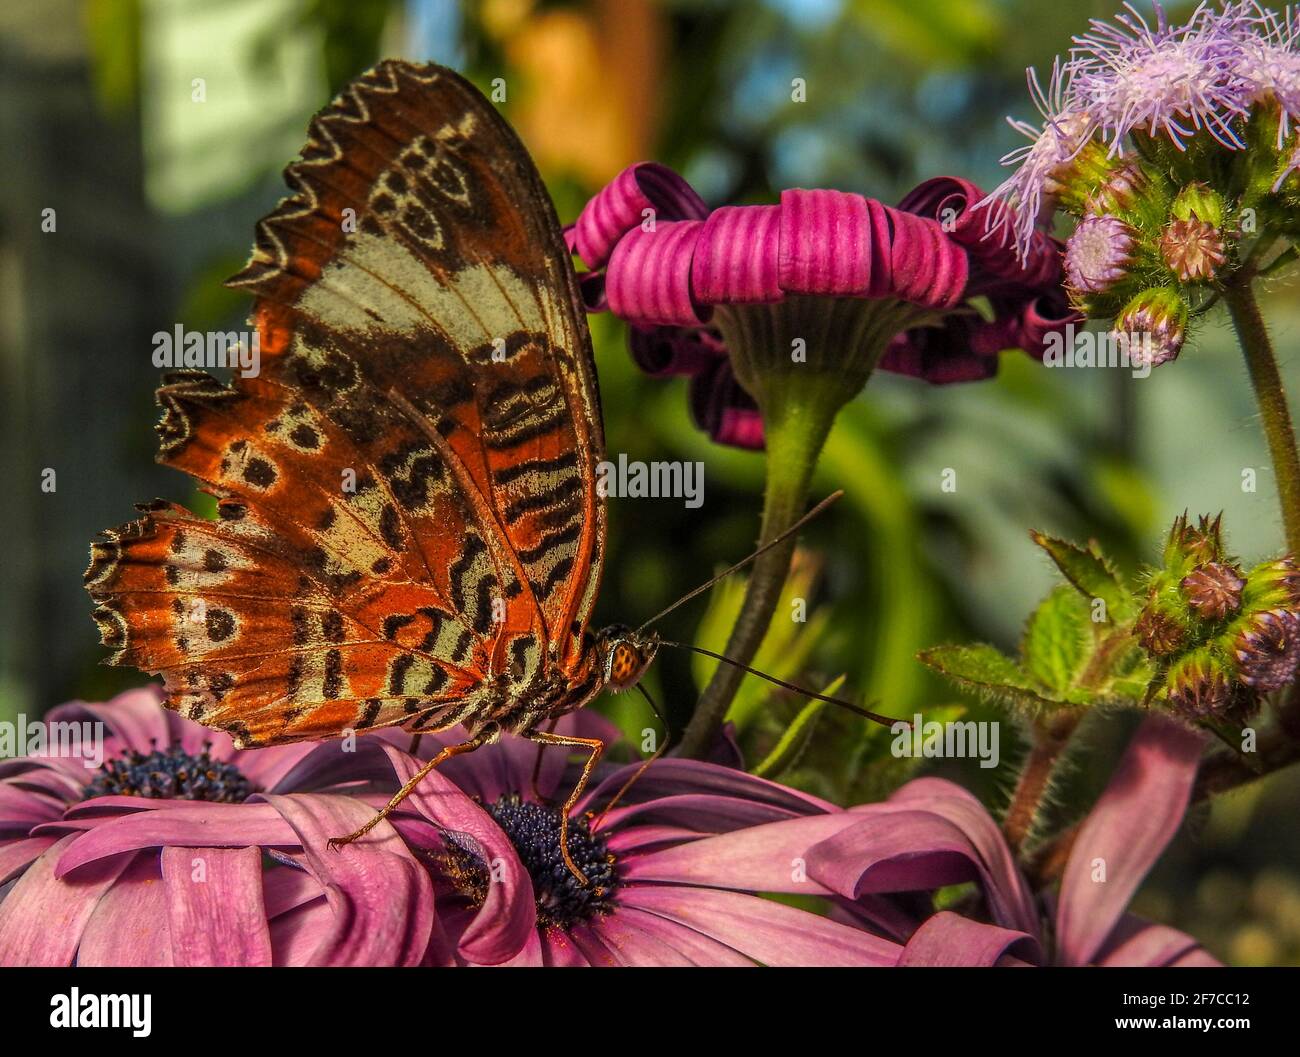 Orange Lacewing Butterfly feeding on Flower Nectar. Stock Photo